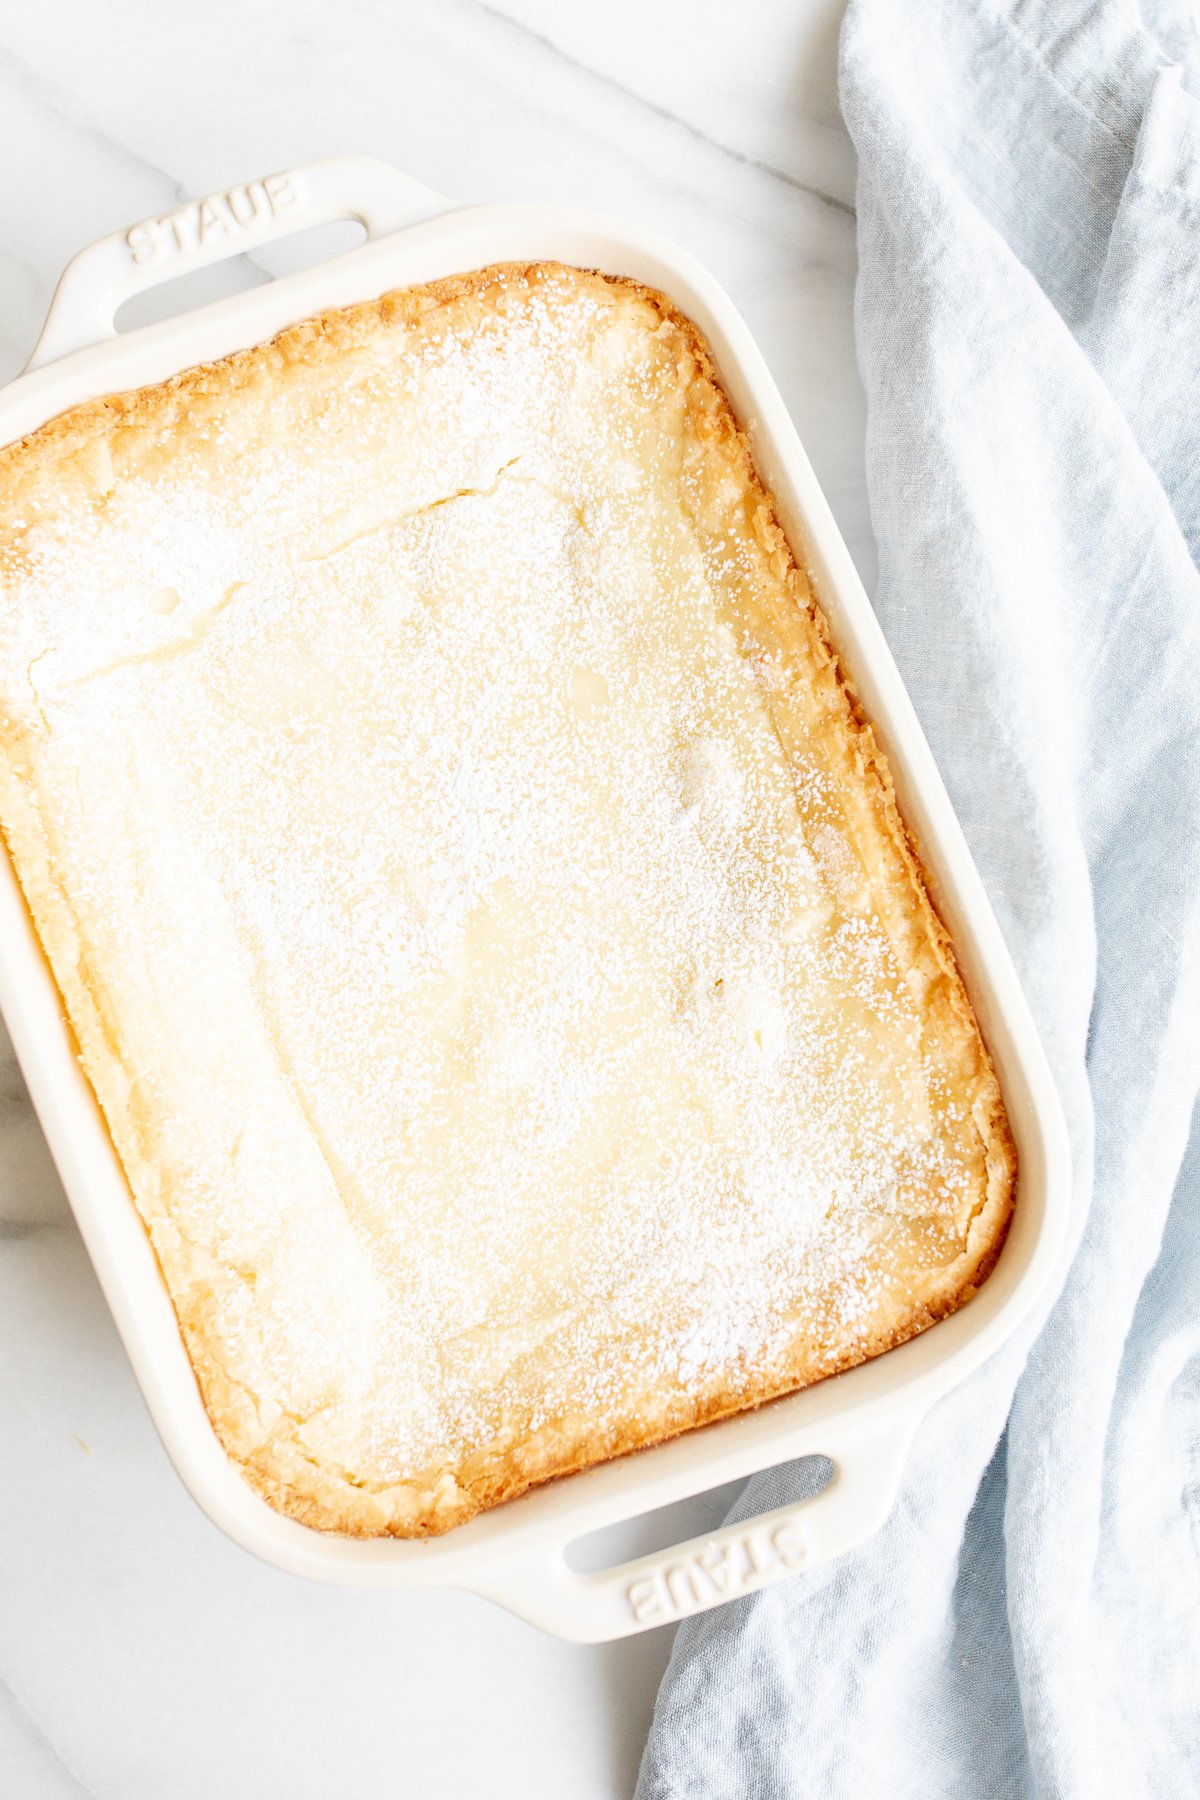 A white rectangular baking dish filled with a homemade gooey butter cake.